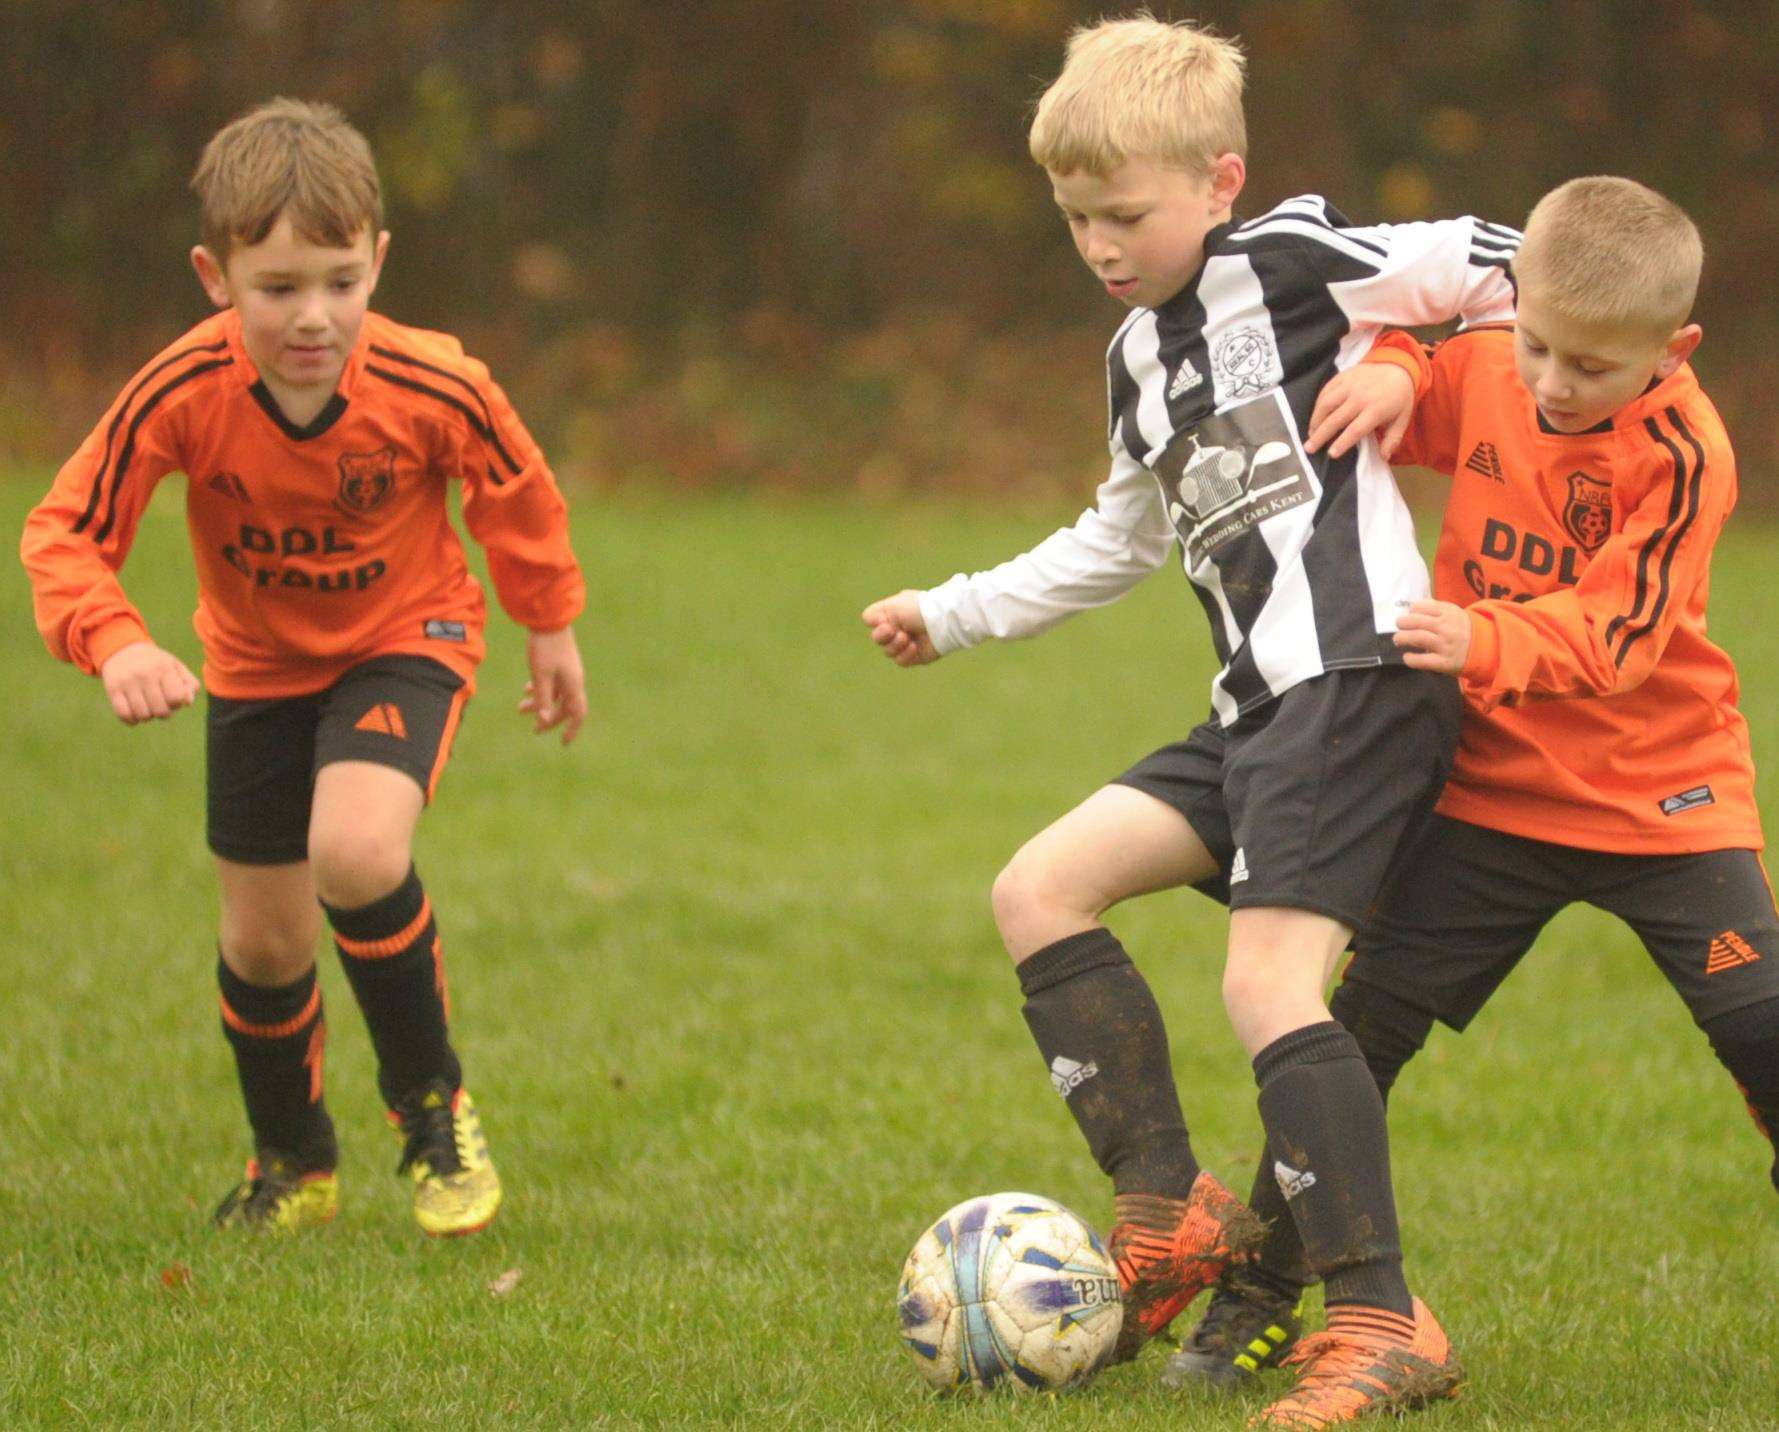 Real 60 Panthers under-7s (stripes) and New Road Giants battle it out Picture: Steve Crispe